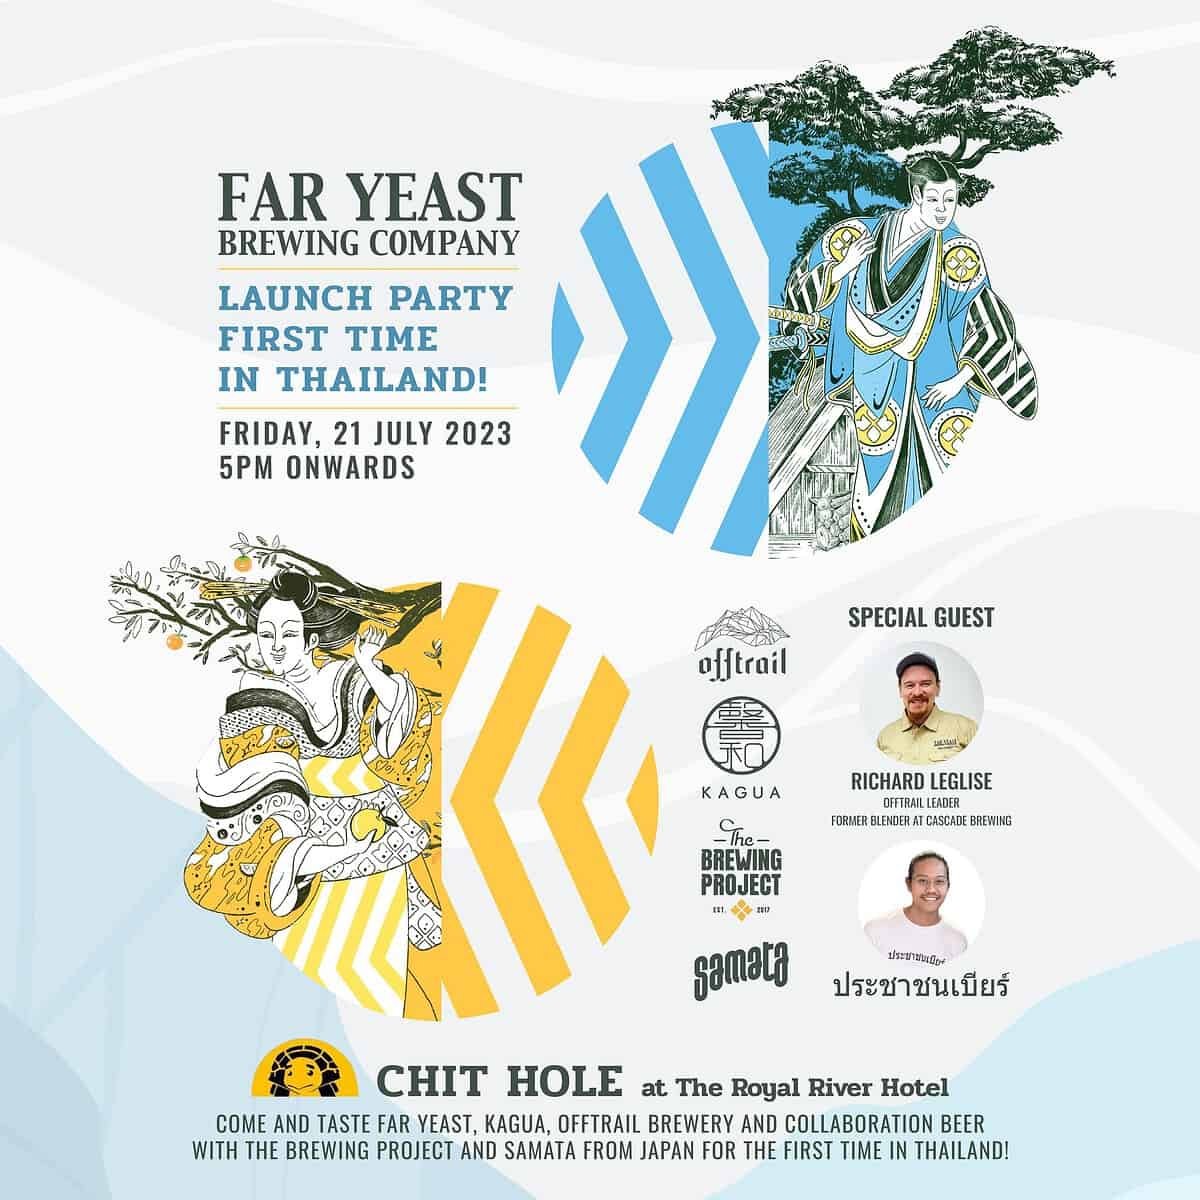 Far Yeast brewing company from Japan launches in Bangkok Thailand. Happening at Chit Hole, located at the Royal River Hotel.